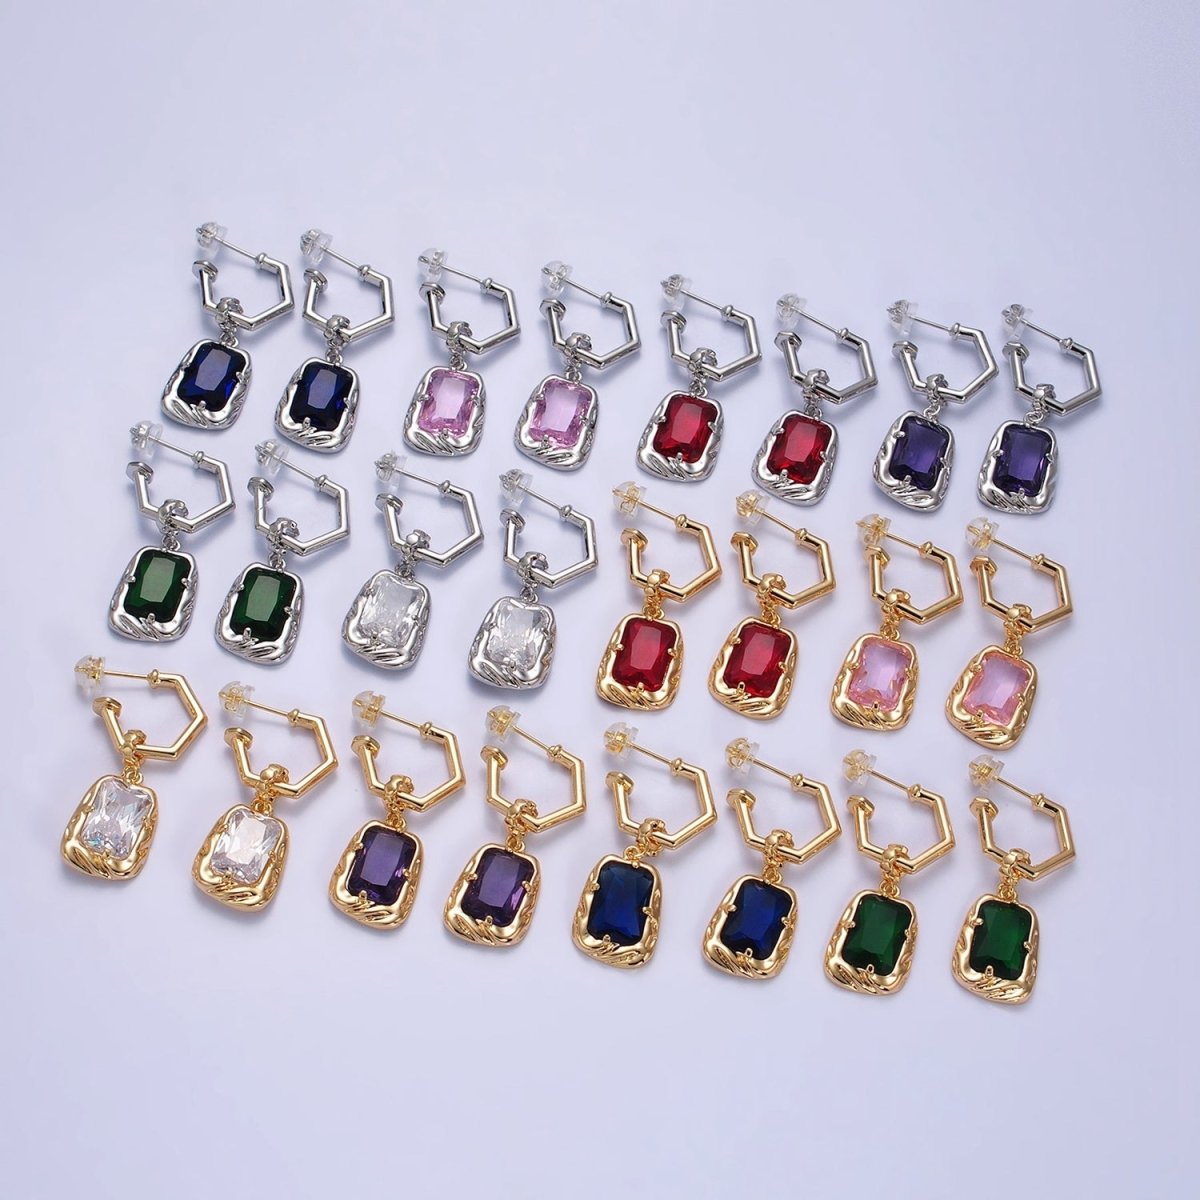 Gold Hoop Earring with Drop Rectangle Colorful Cubic Zirconia Stone in Silver, Gold Earring AB678 - AB689 - DLUXCA